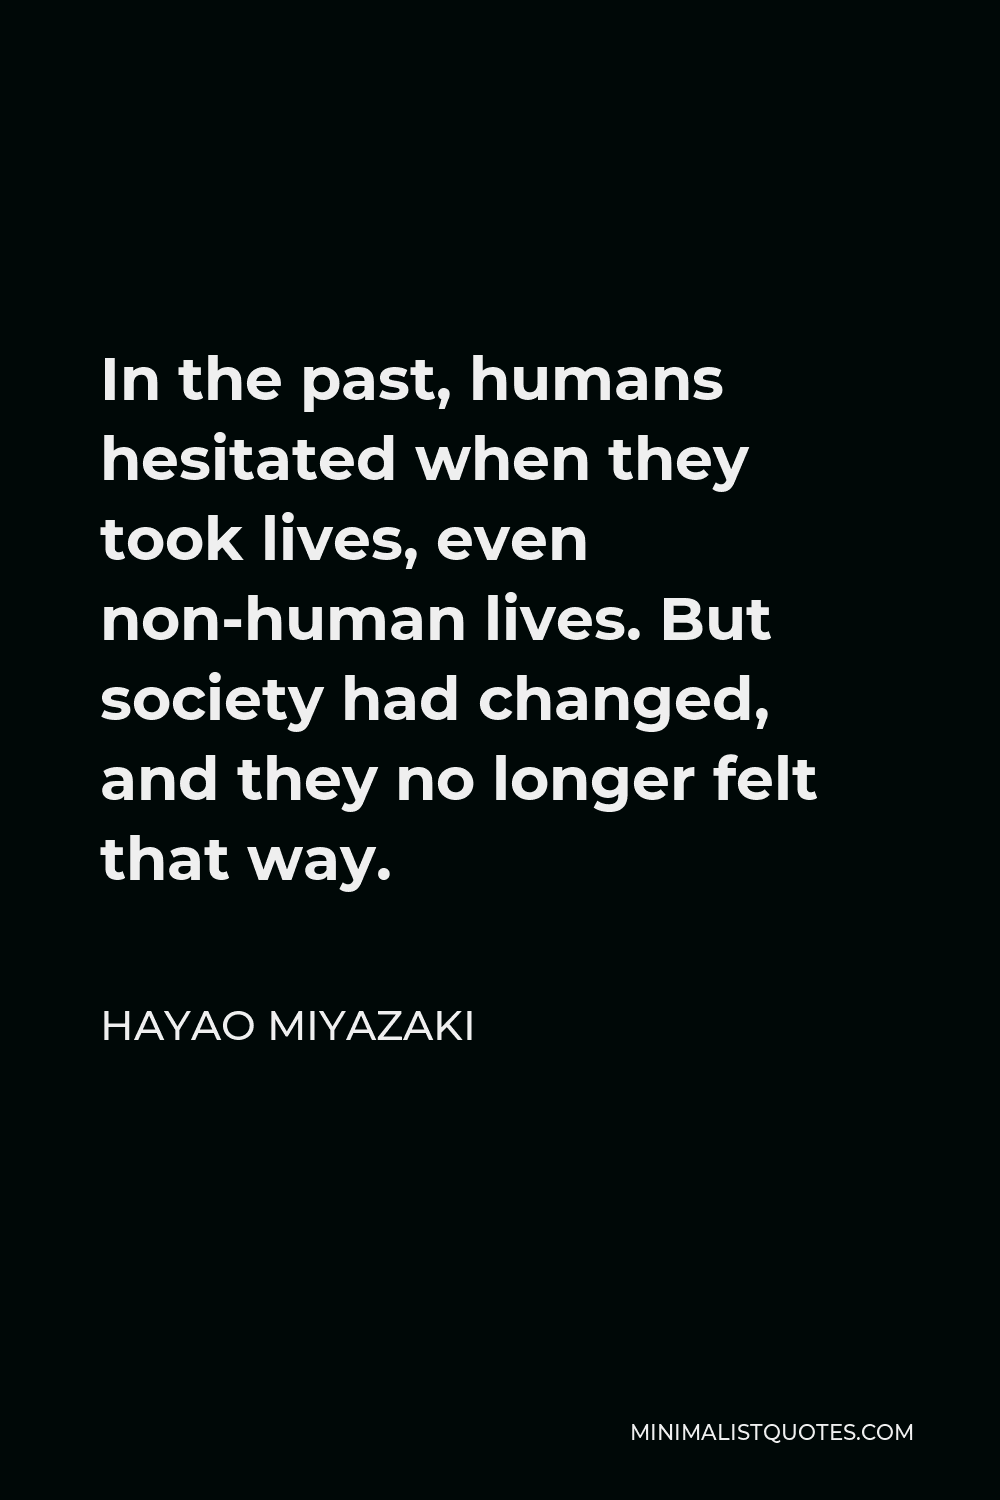 Hayao Miyazaki Quote - In the past, humans hesitated when they took lives, even non-human lives. But society had changed, and they no longer felt that way.